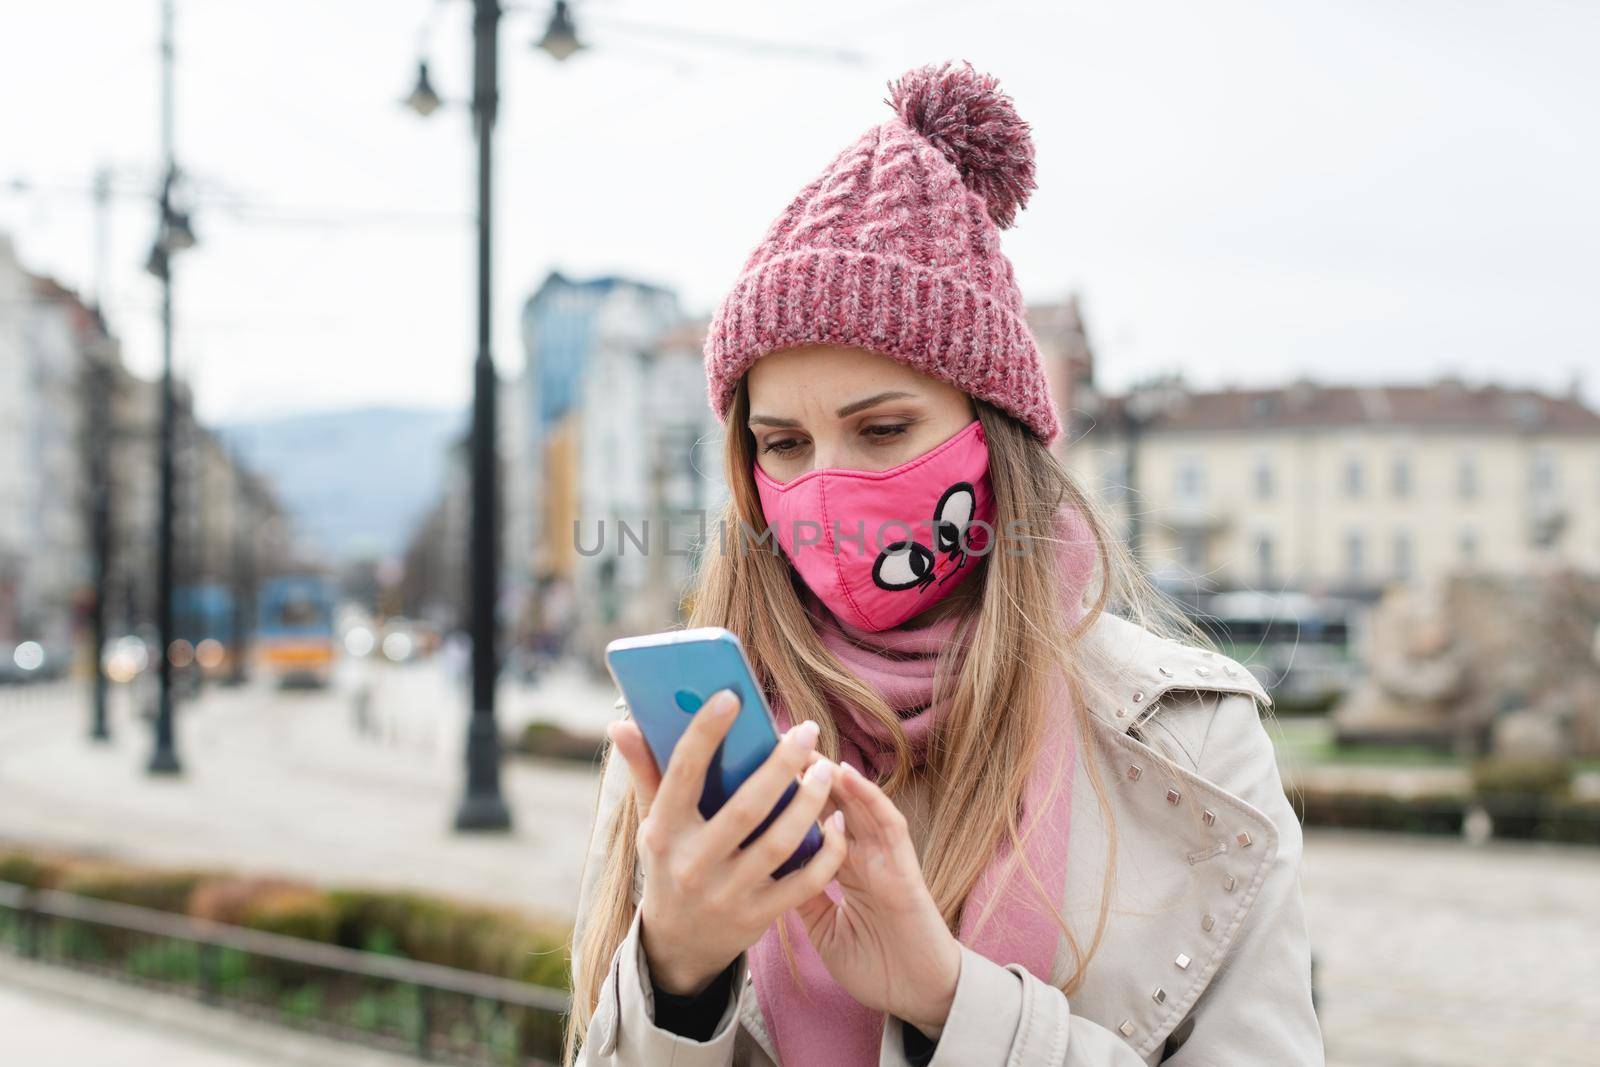 Anxious woman wearing corona mask checking news on her phone in lockdown city